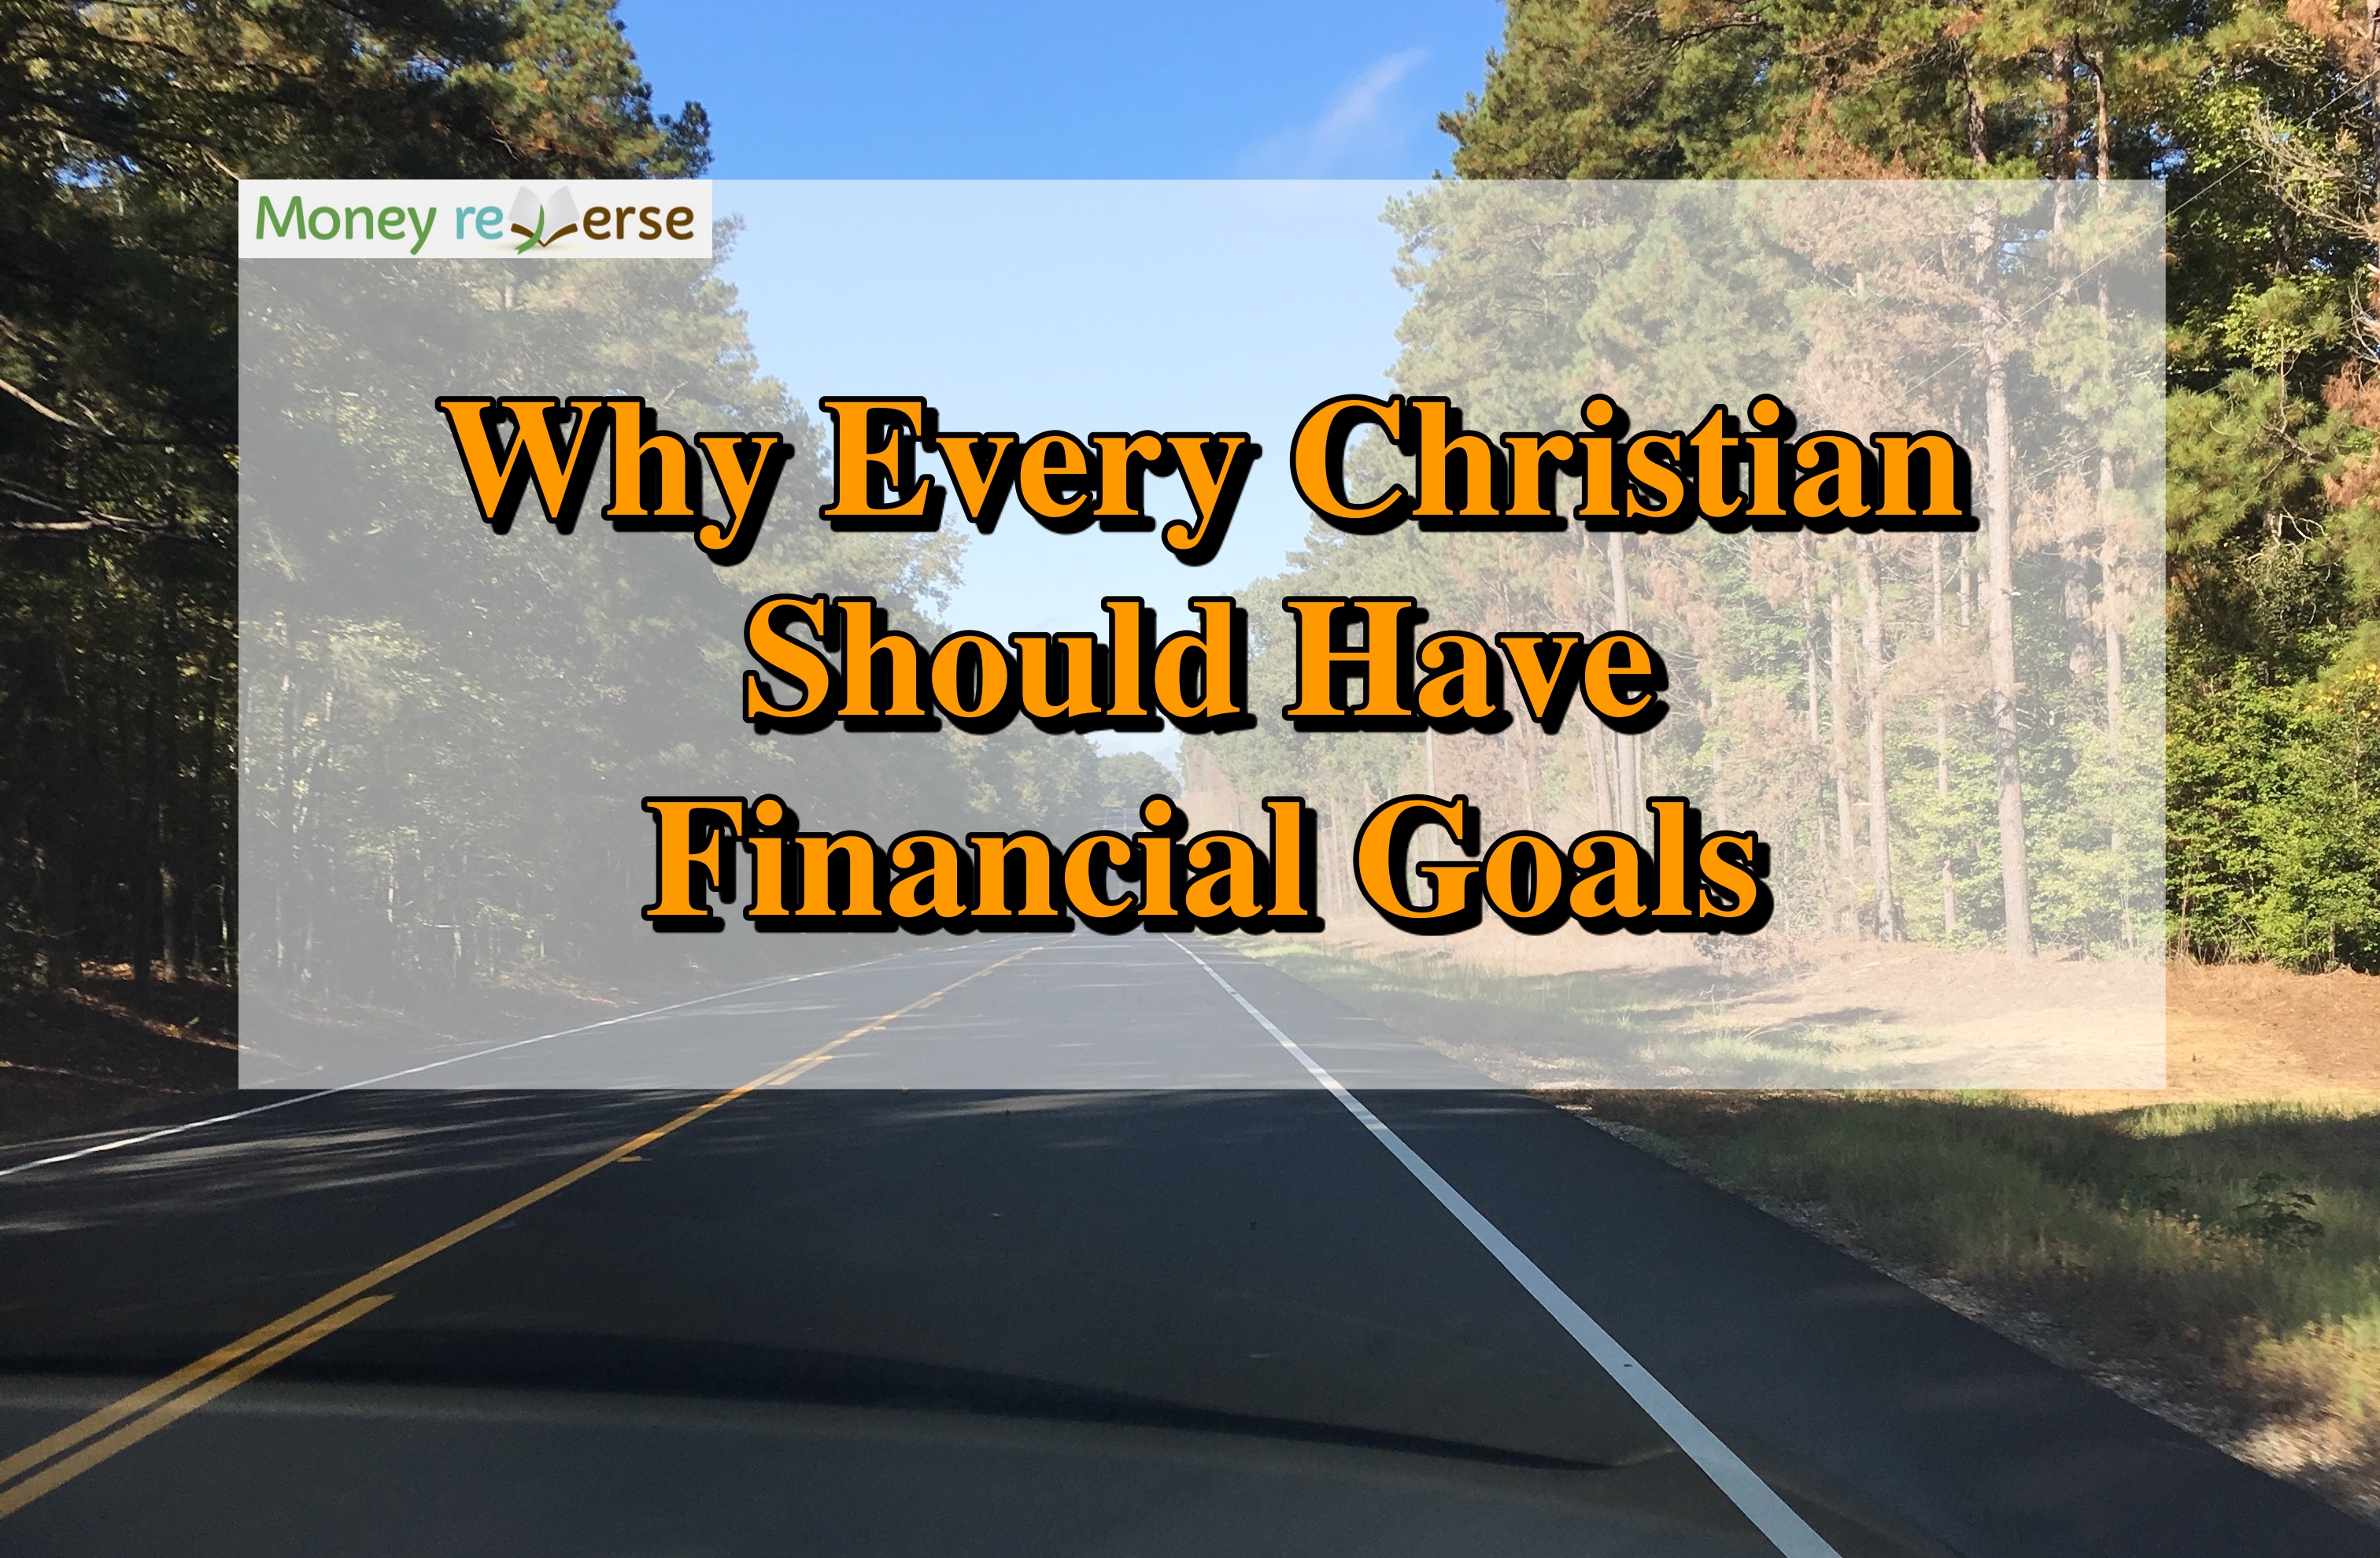 Why every Christian should have financial goals